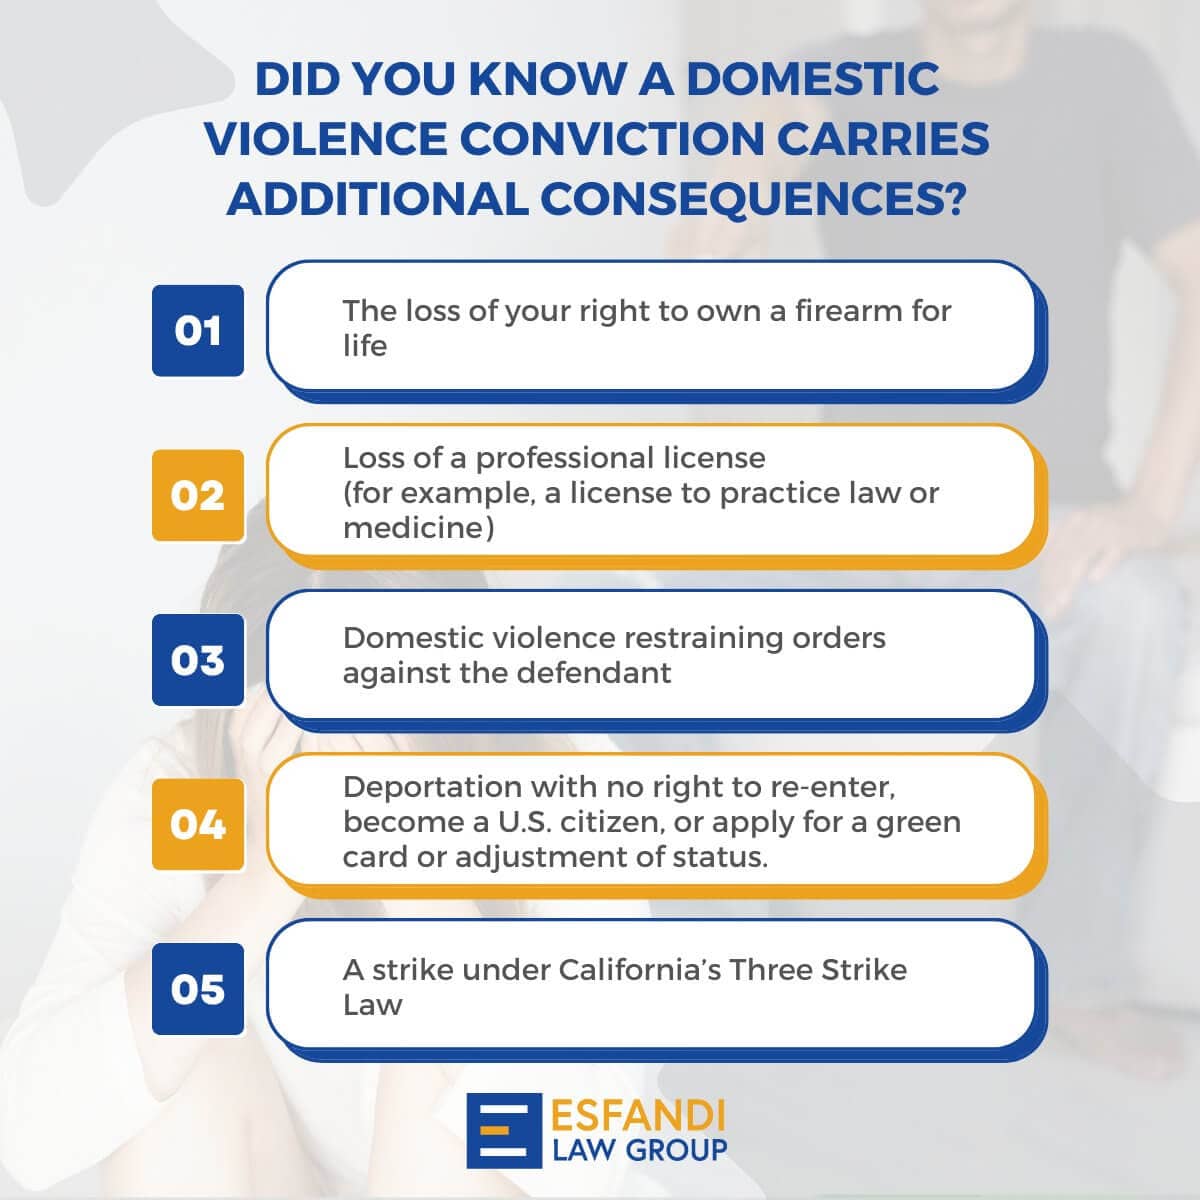 Consequences of a Domestic Violence Conviction